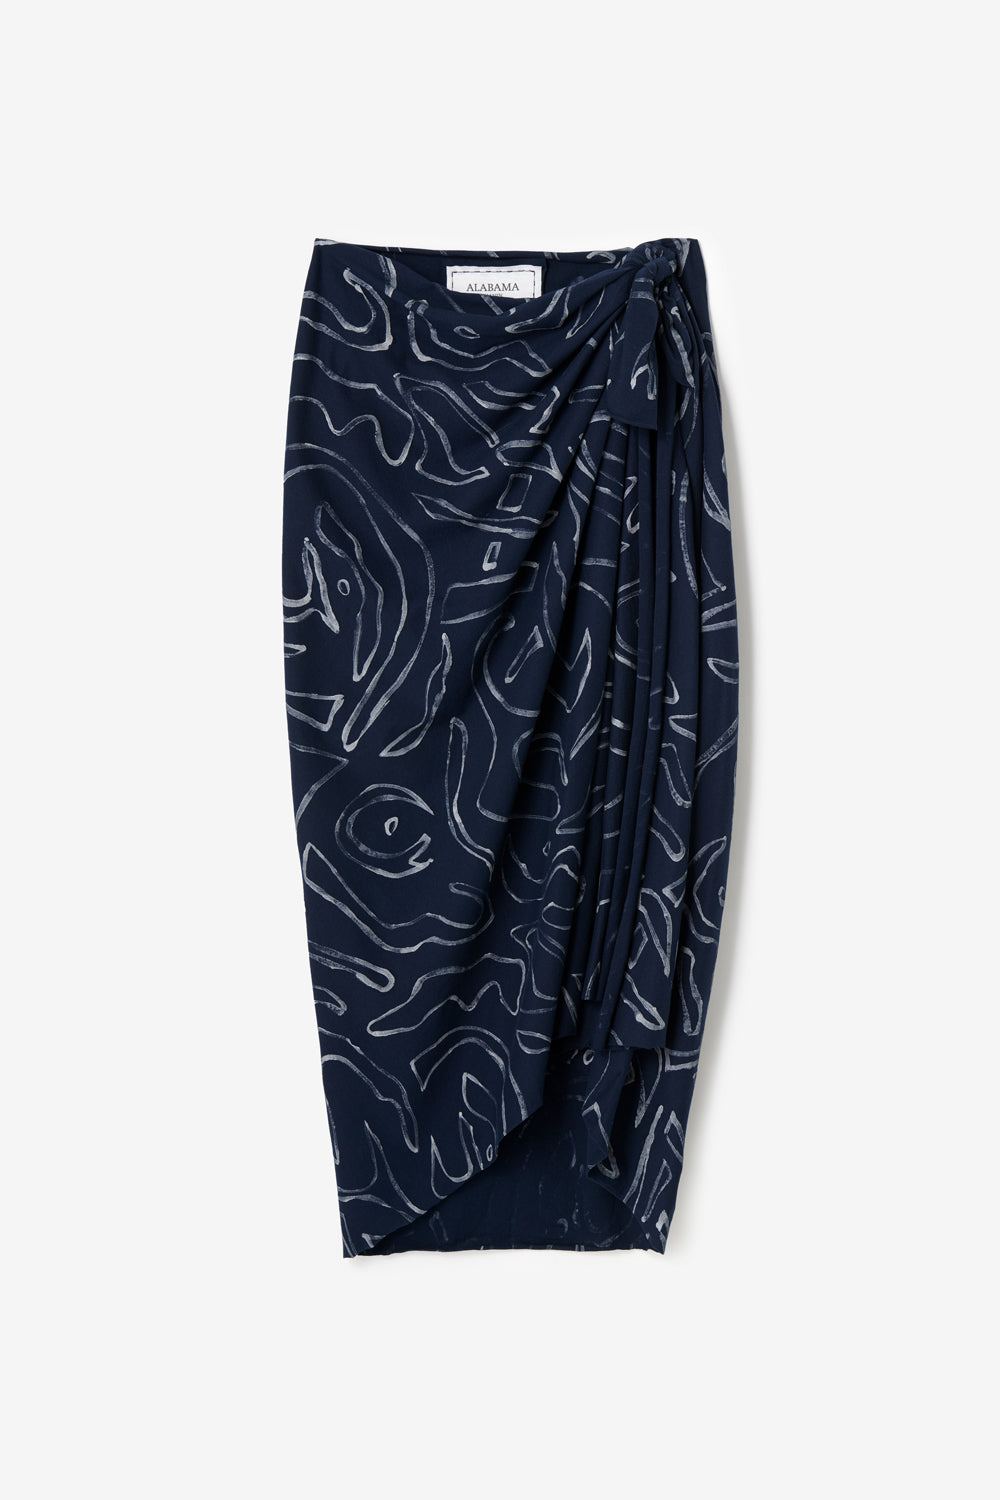 The Sarong in navy with hand-painted abstract figures.